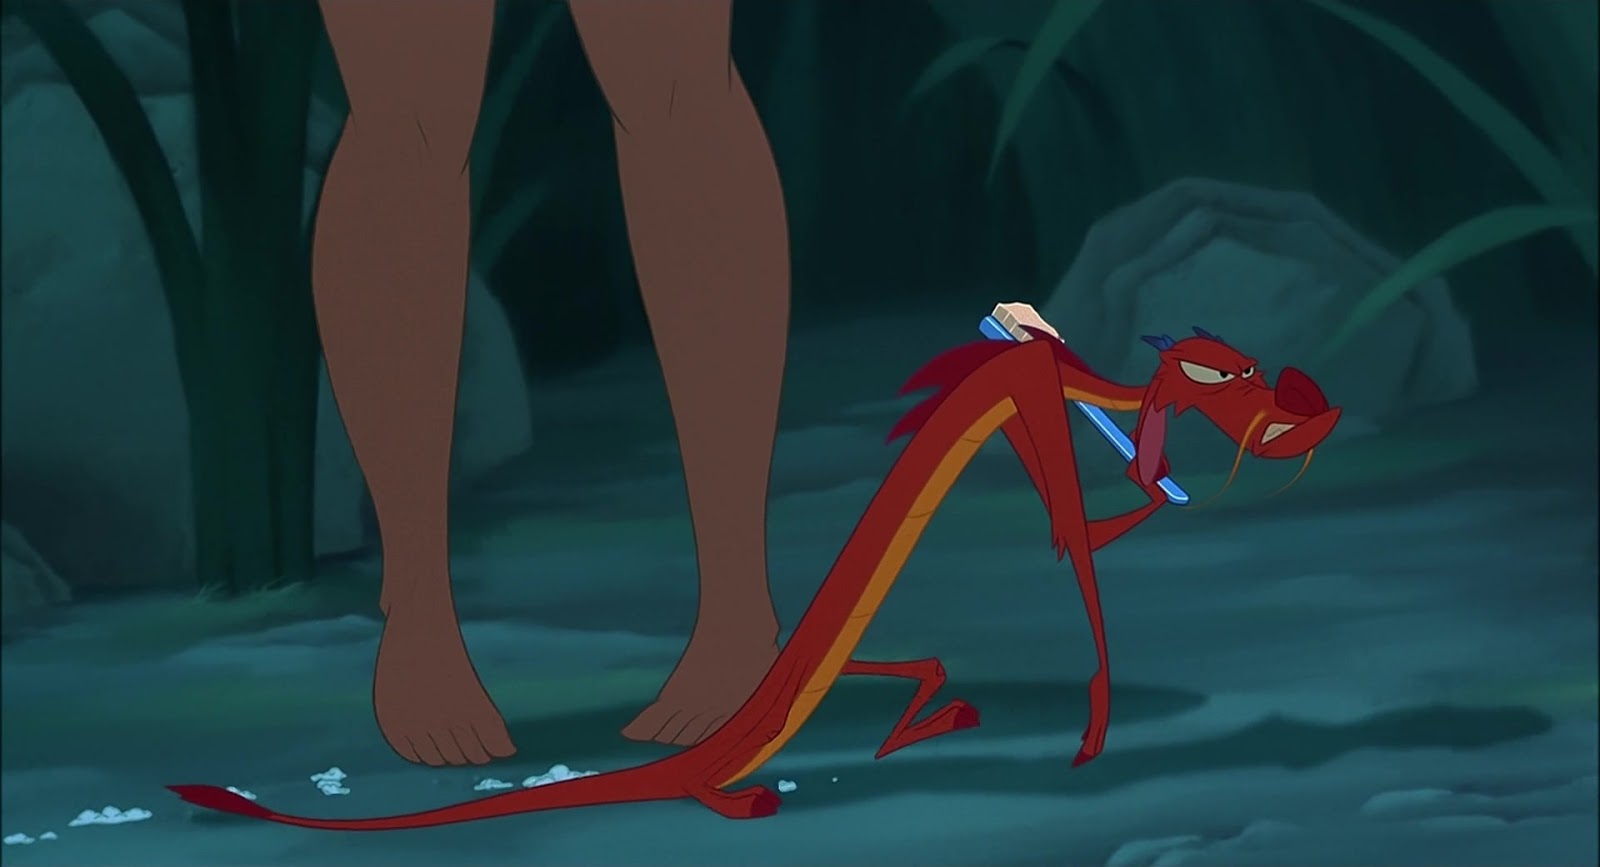 You guys can find more of Mulan's Feet in these earlier tributes here....